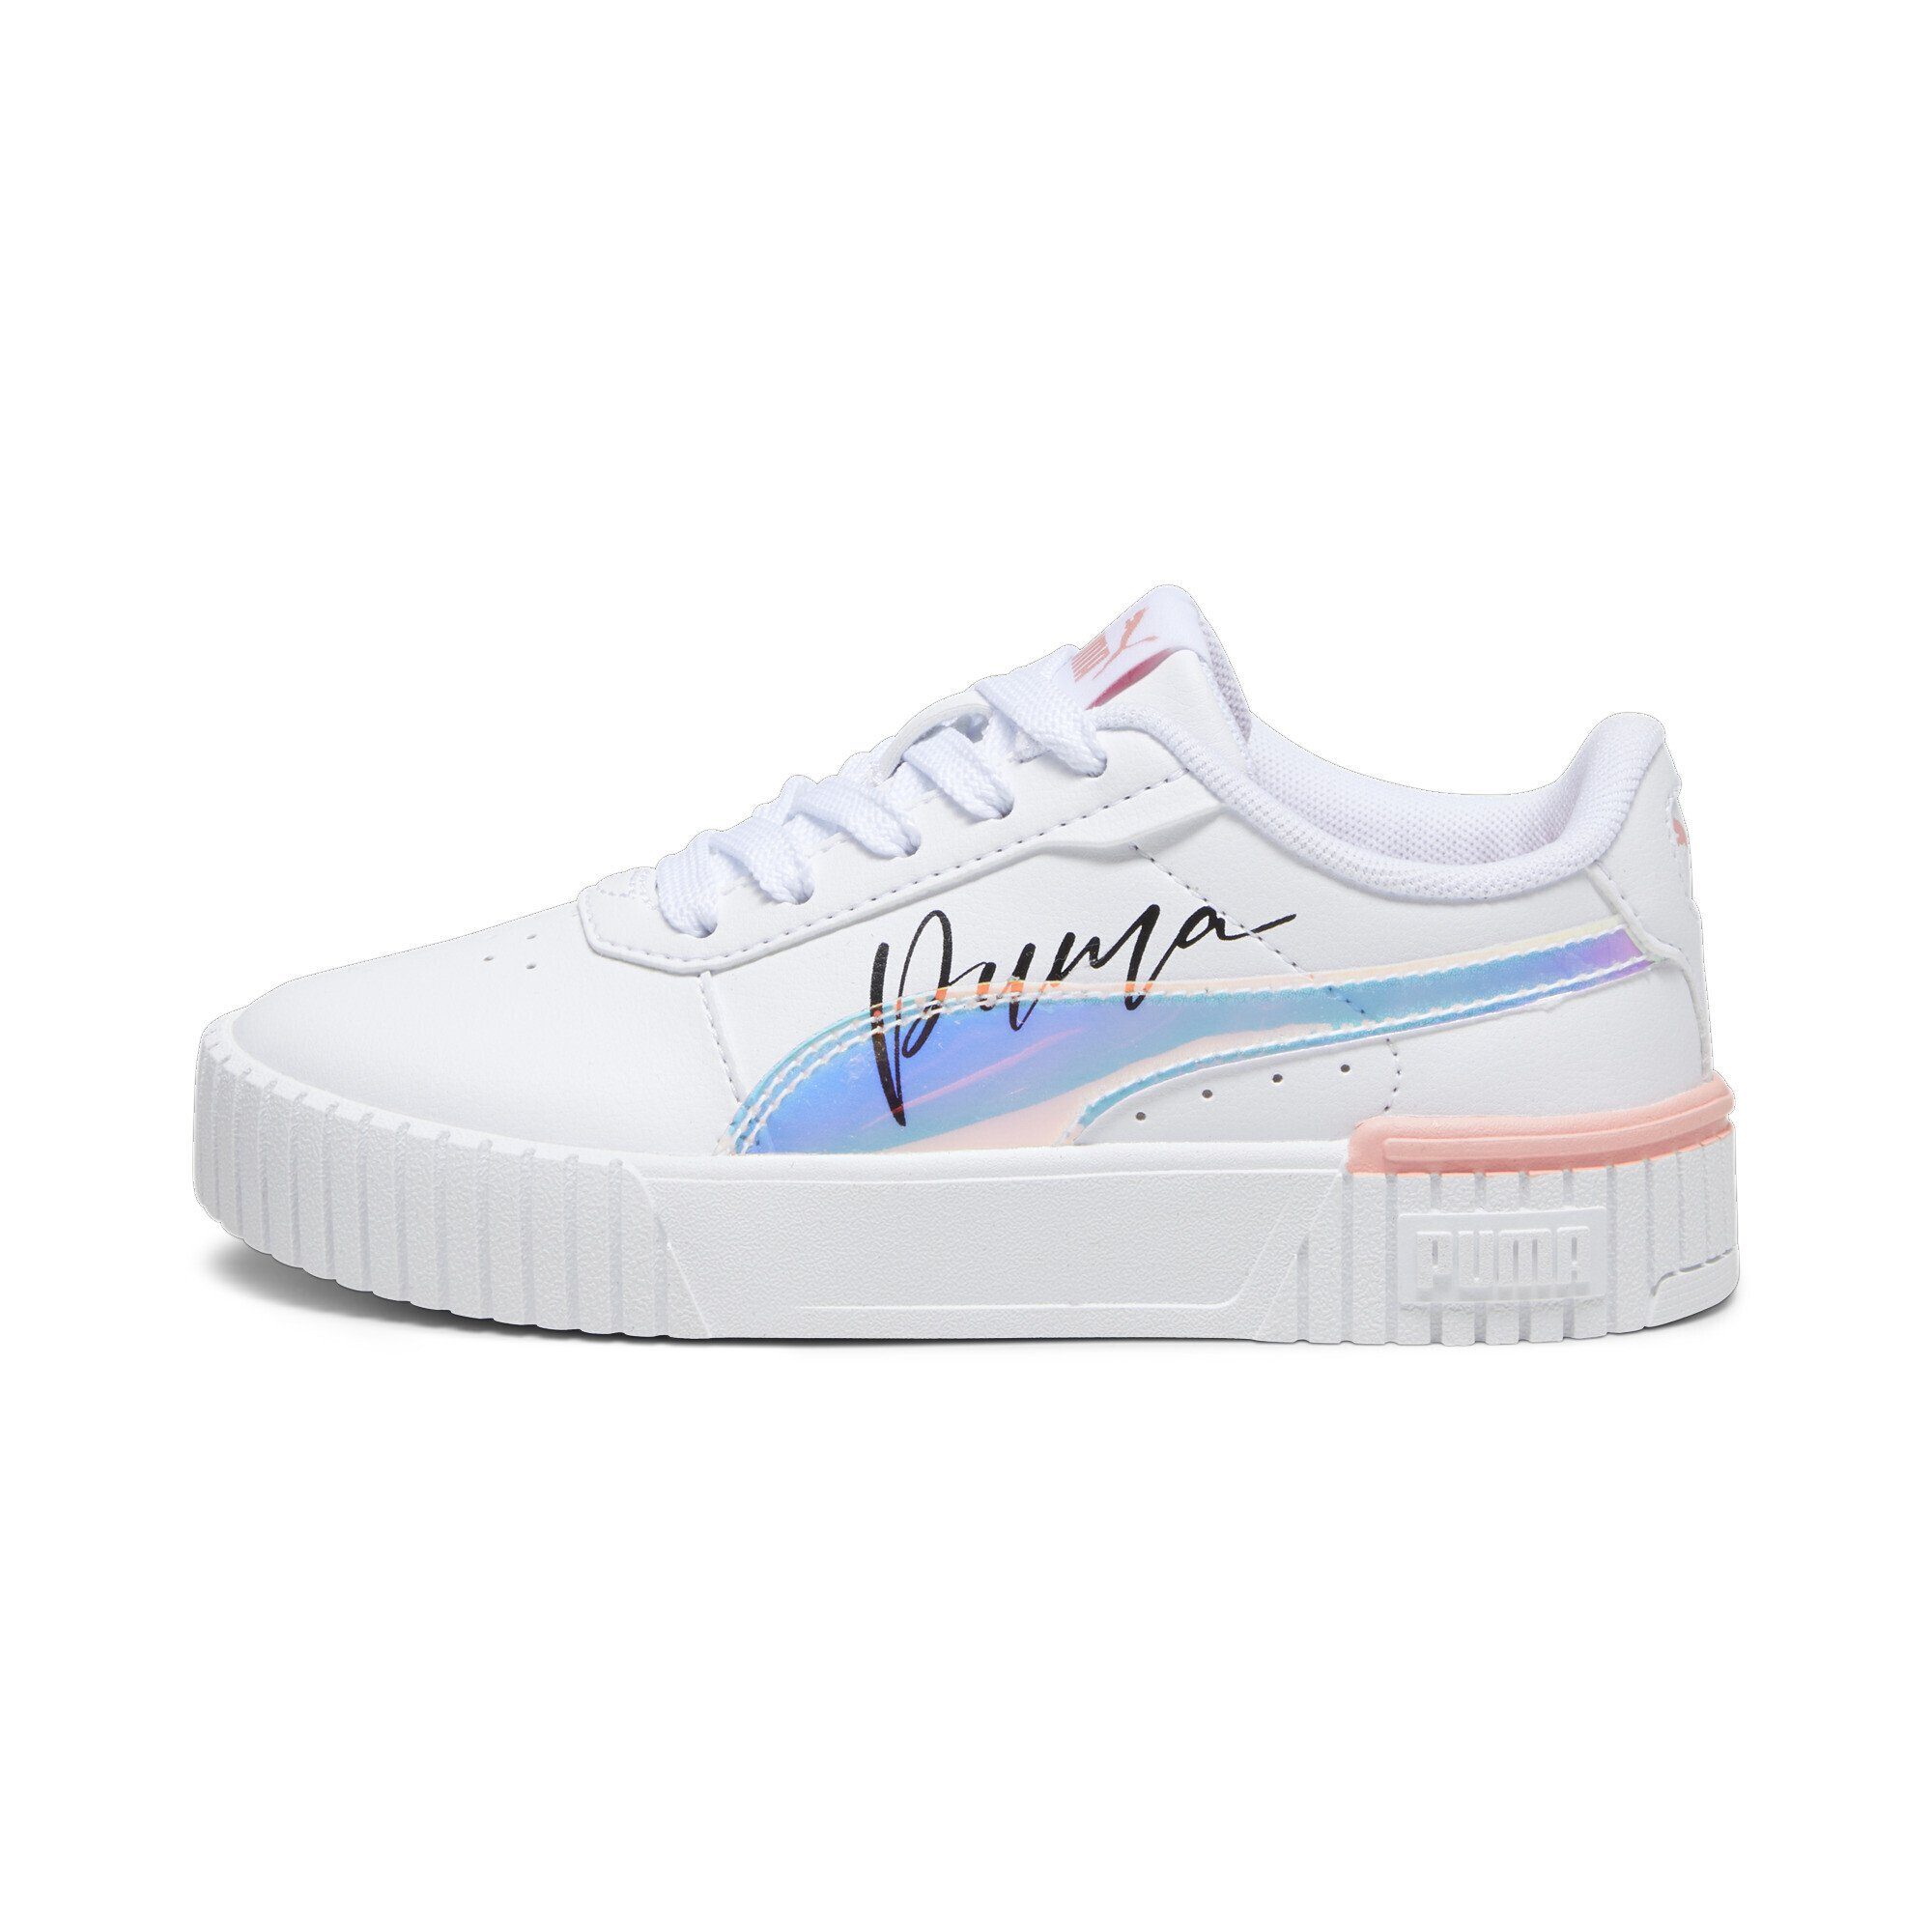 Wings 2.0 Sneaker Carina Mädchen Crystal PUMA Sneakers